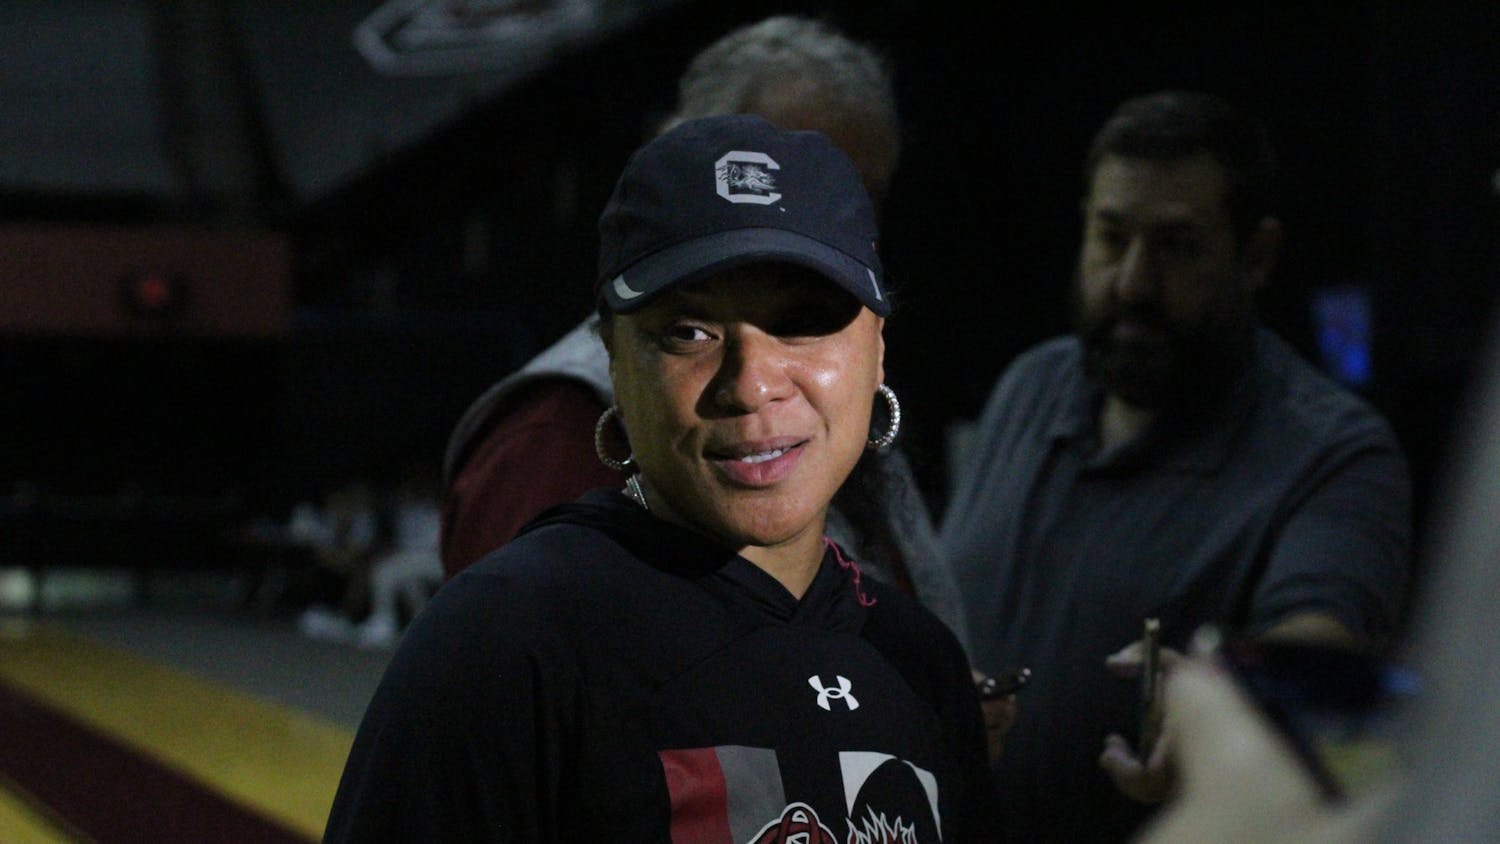 Dawn Staley, head coach of the South Carolina's women’s basketball team, talks with reporters after the first official practice of the season on Sept. 28, 2023. She said she is optimistic and confident in her team’s abilities to have a successful upcoming season.